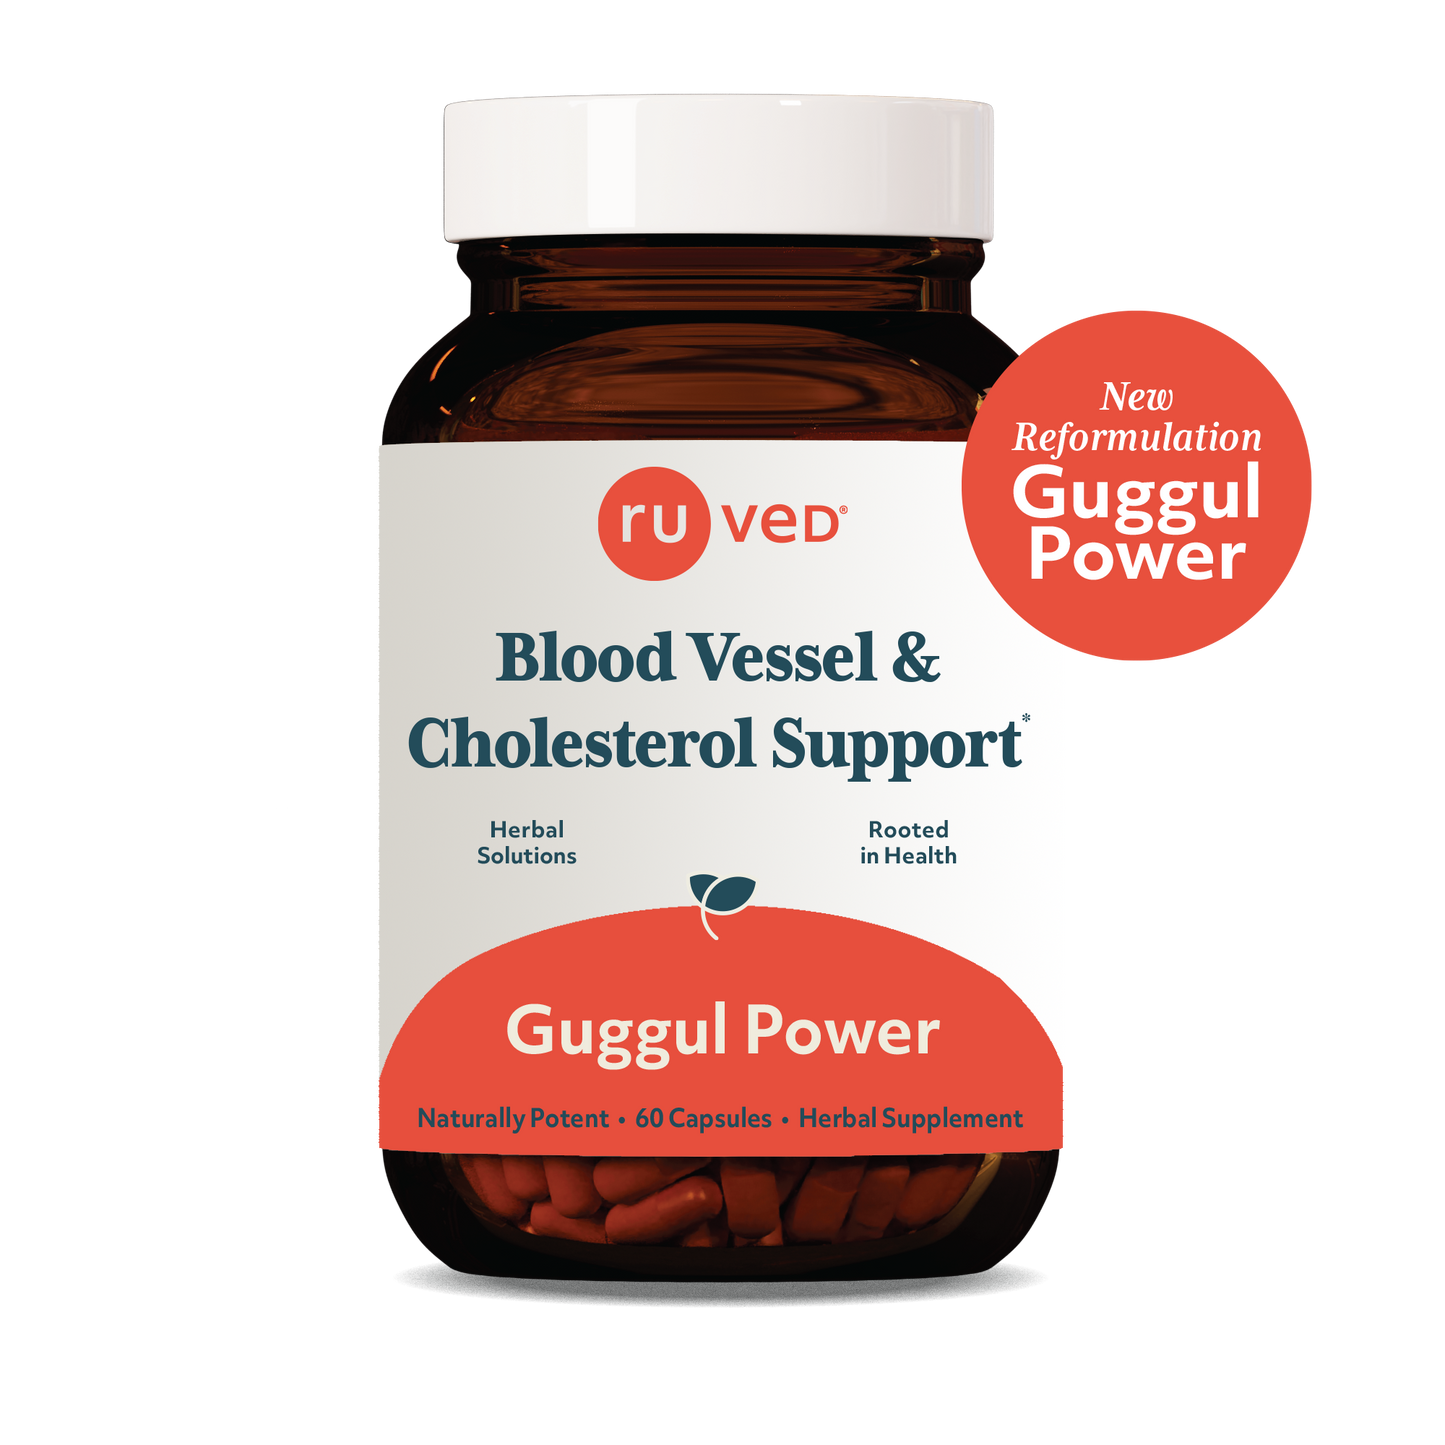 Guggul Power Capsules - Ayurvedic Cholesterol Support, 60 Vegetarian Capsules, Herbal Blend for Blood Vessel Health and Heart Support